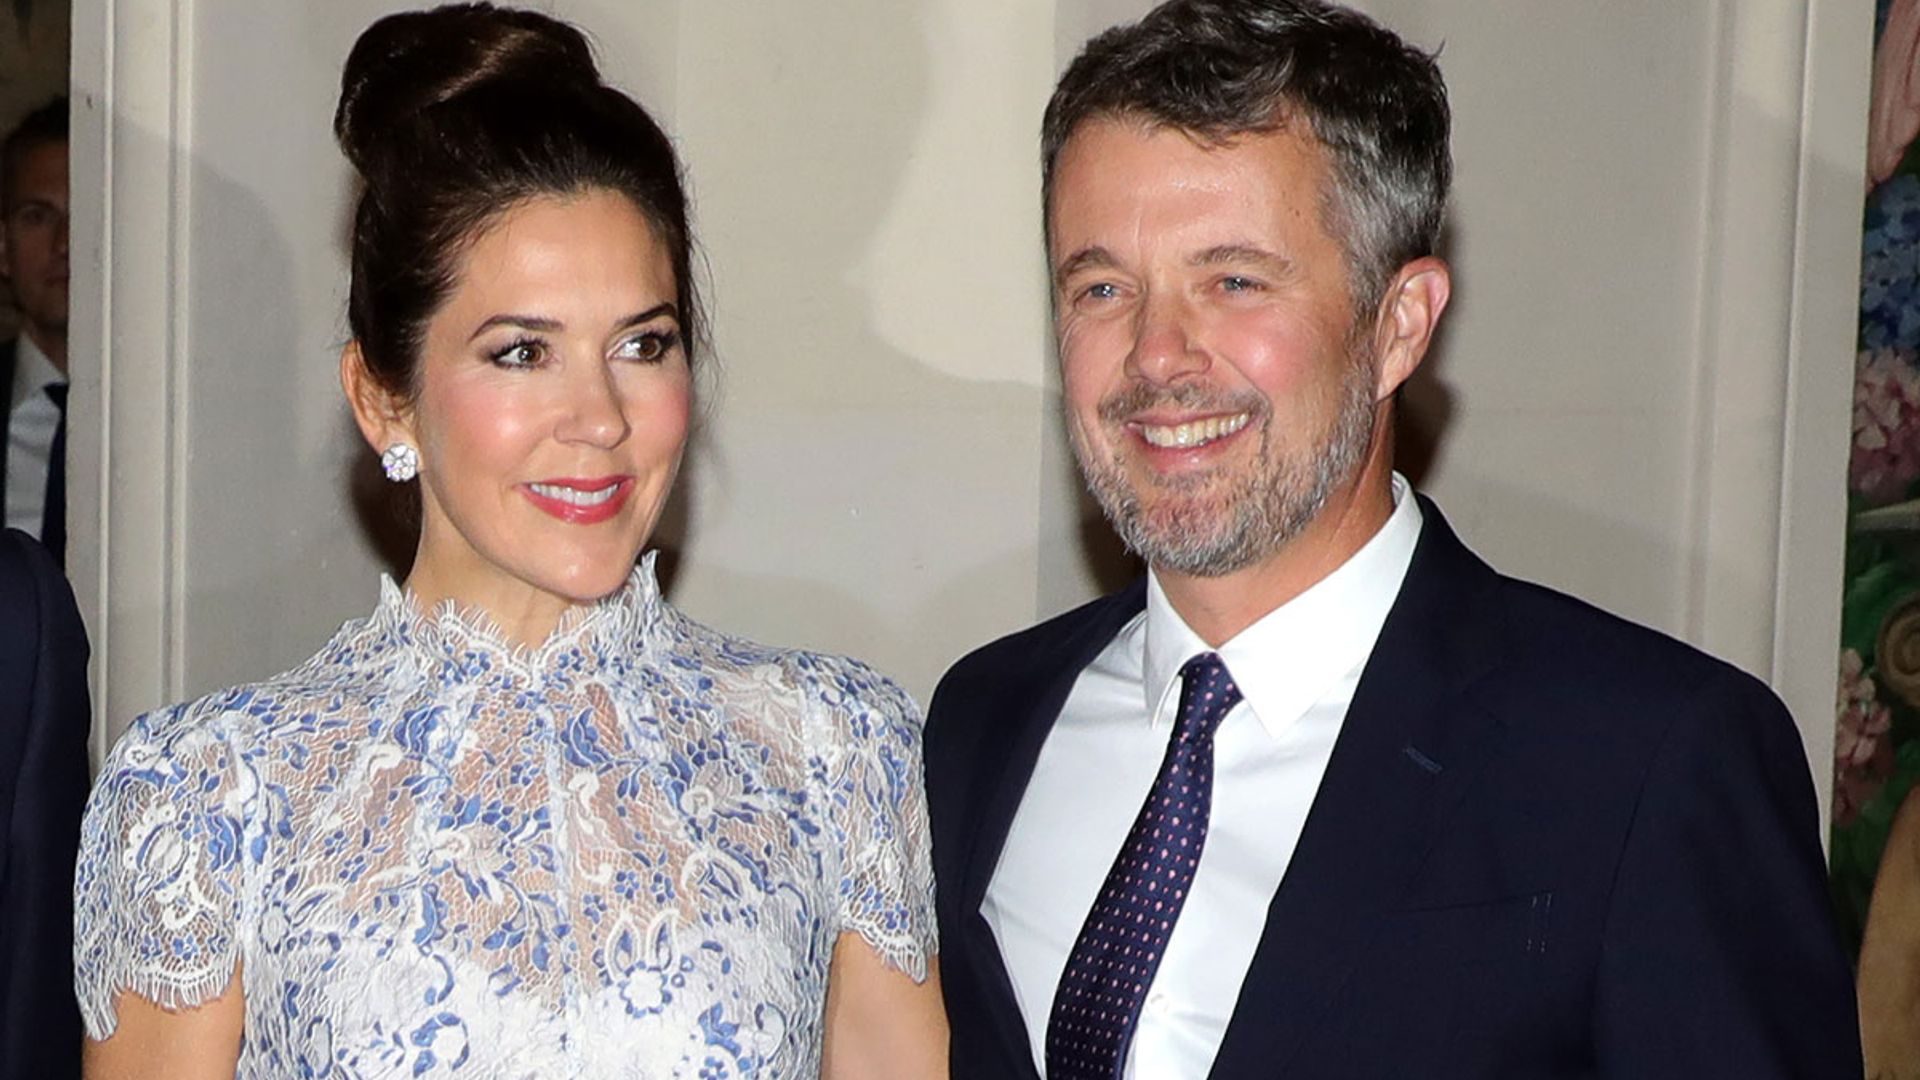 Princess Mary and Prince Frederik share cosy snap from their living room sofa as they cuddle up to watch TV